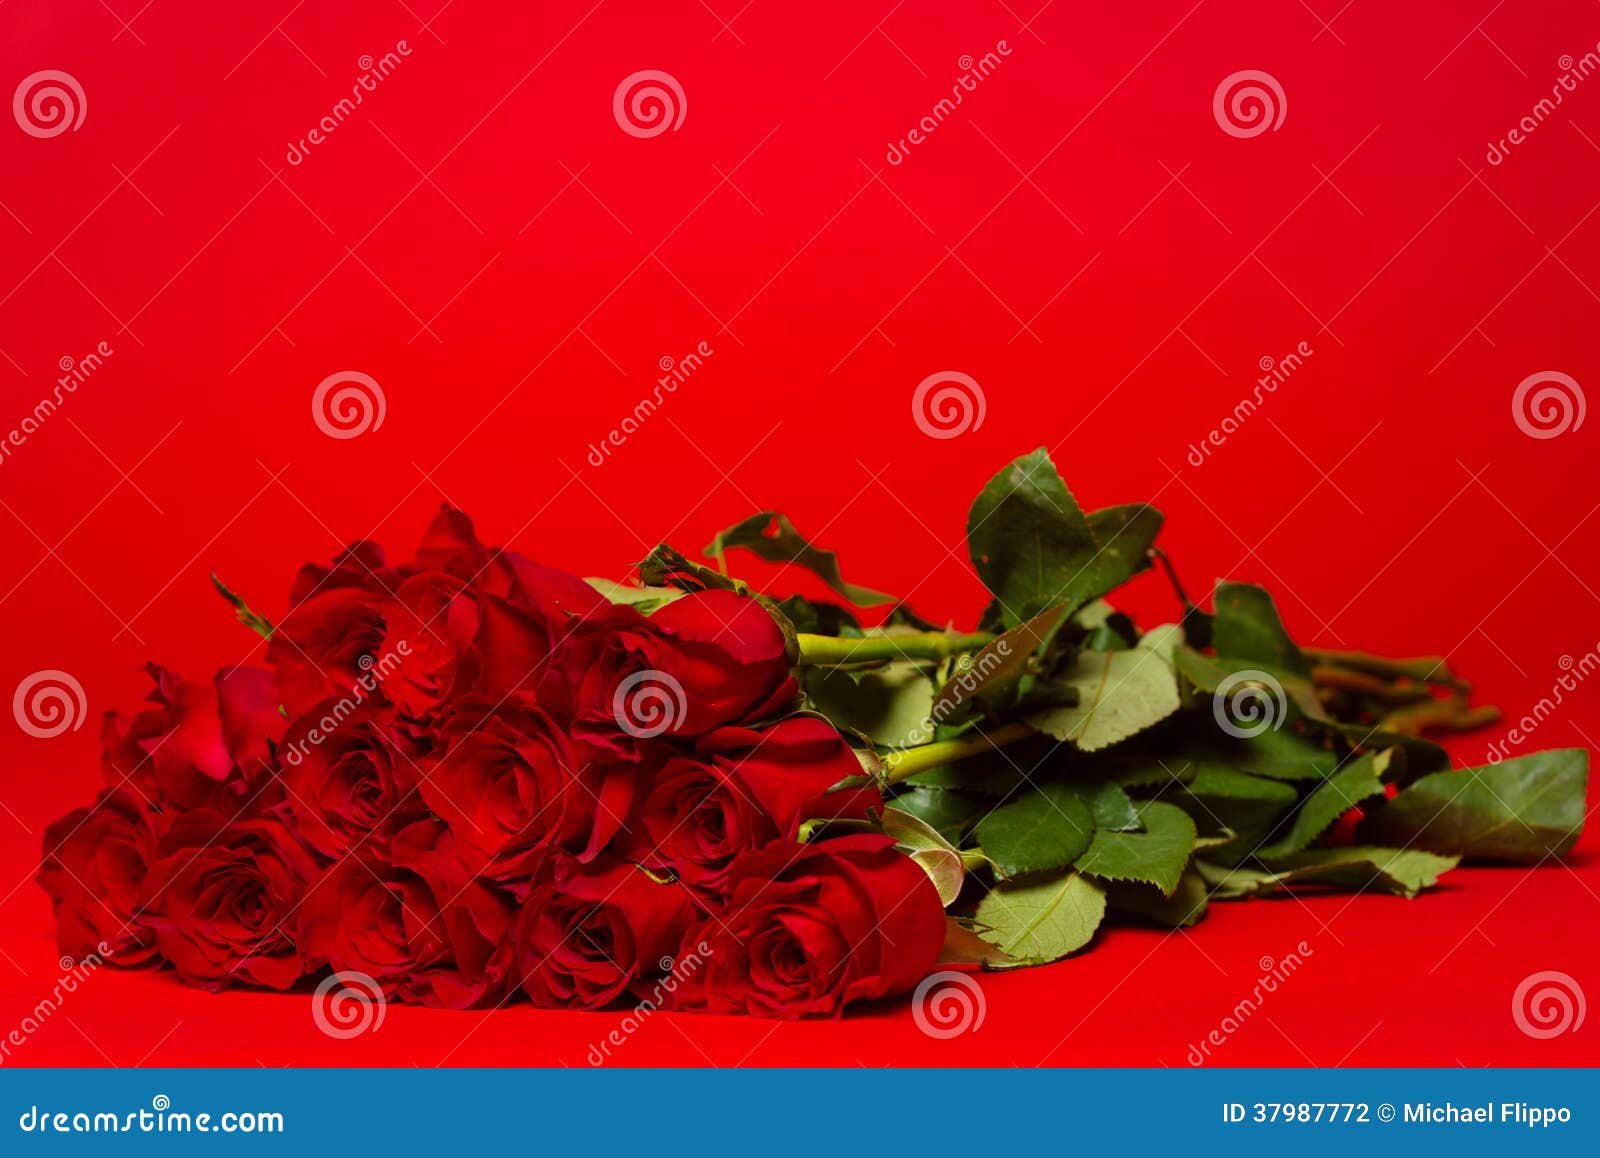 dozen red roses on a red background